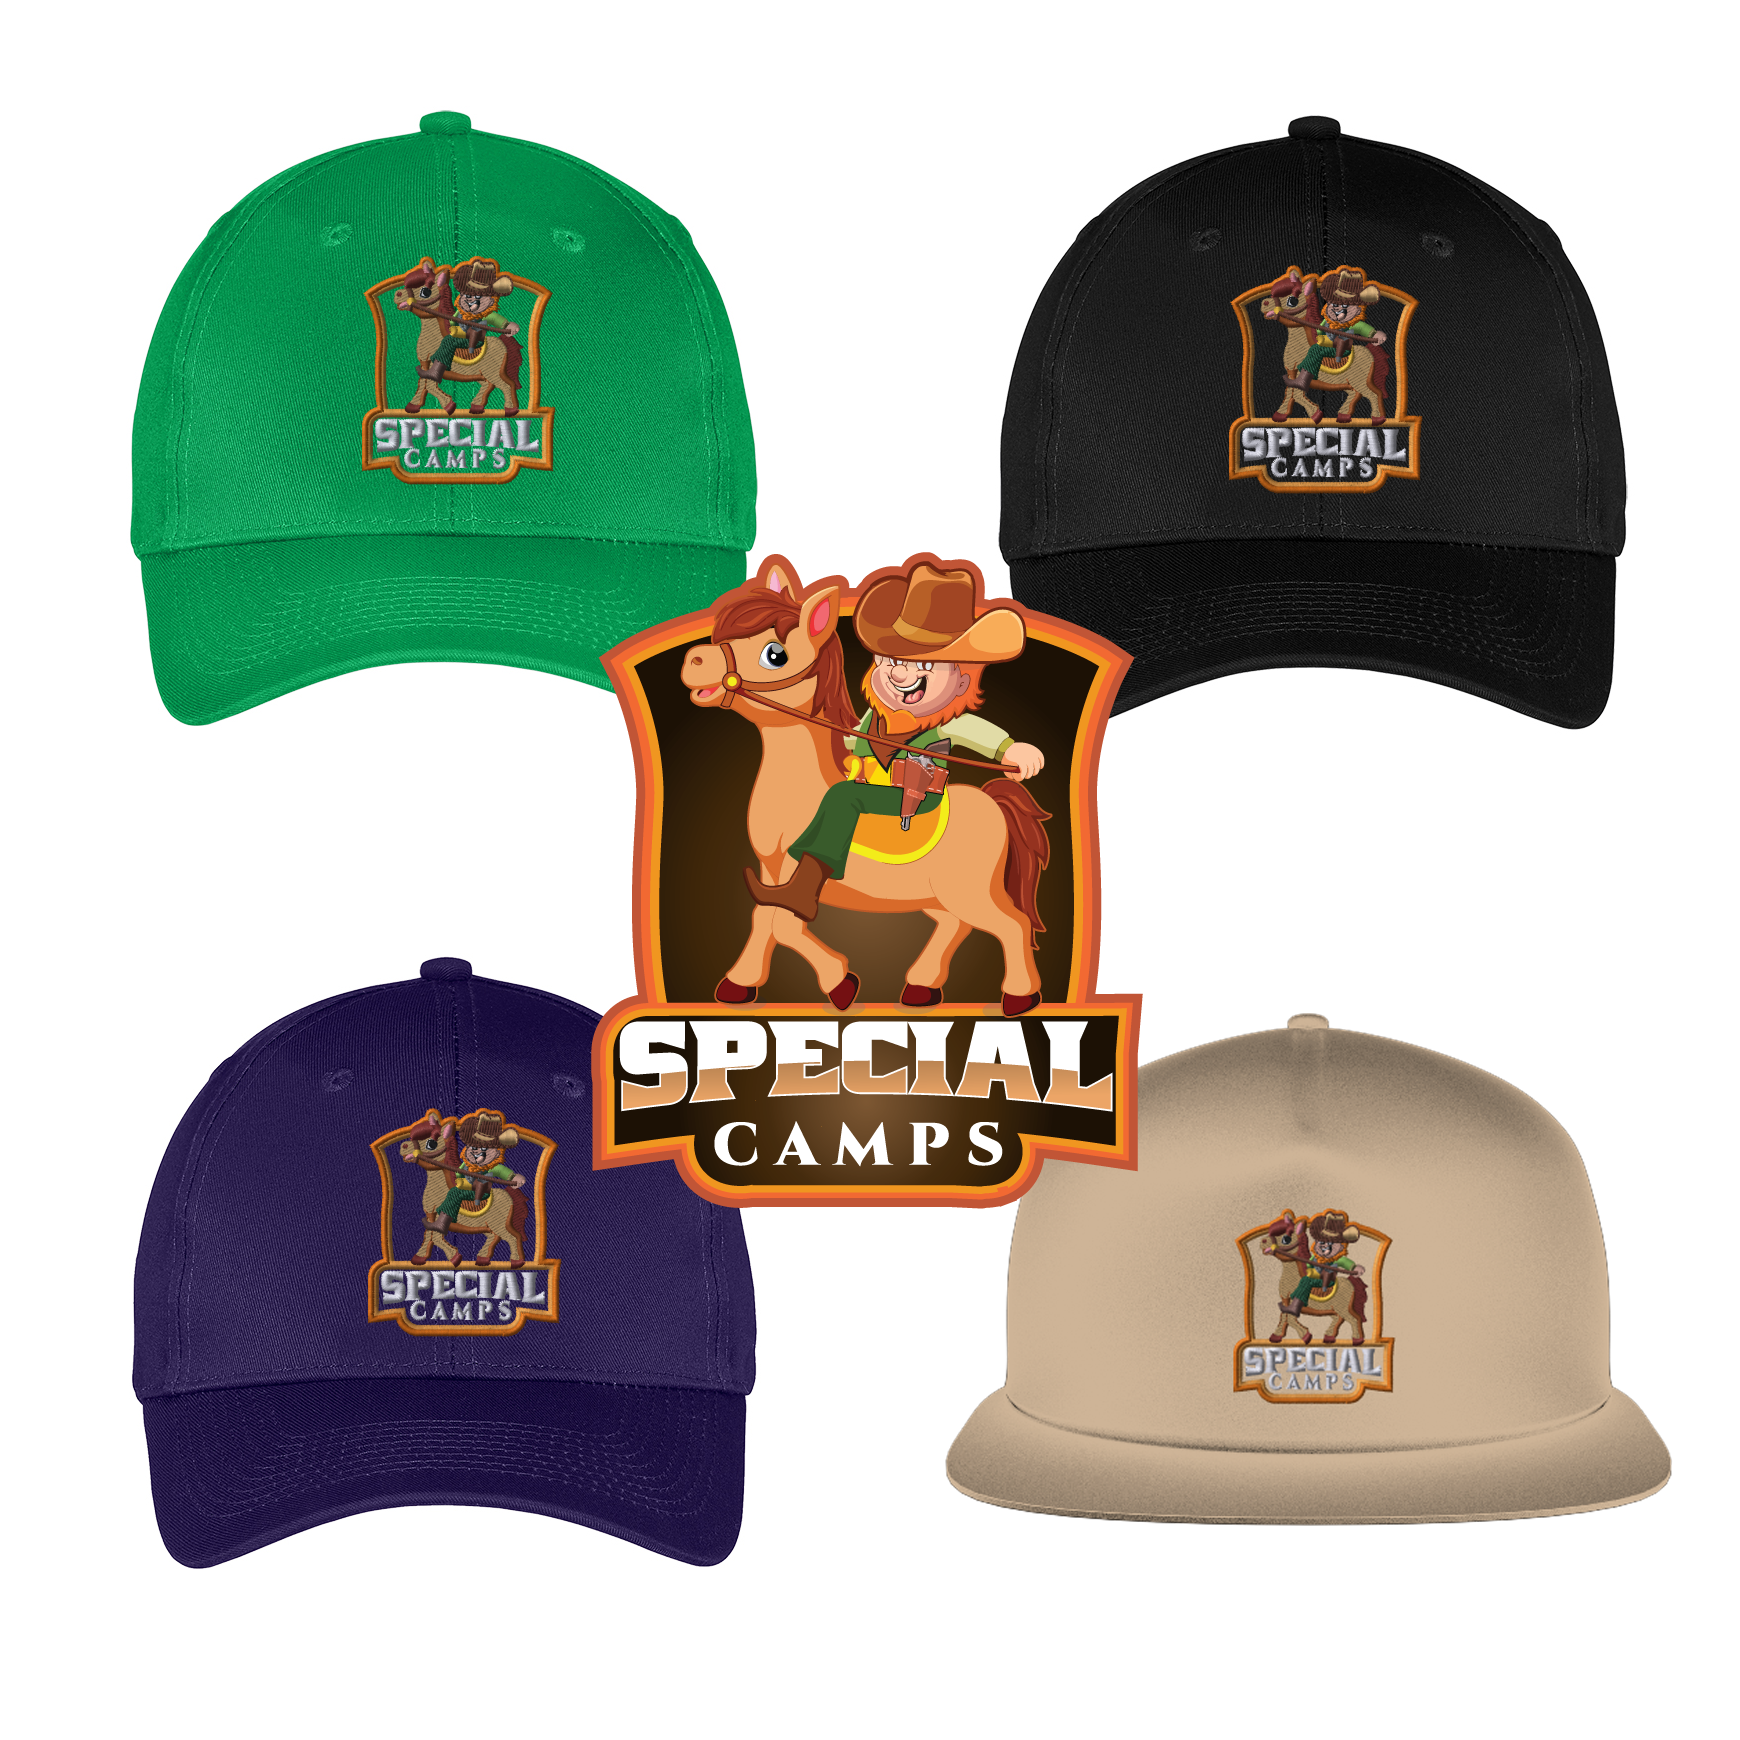 Limited Edition Special Camps Hats are HERE!